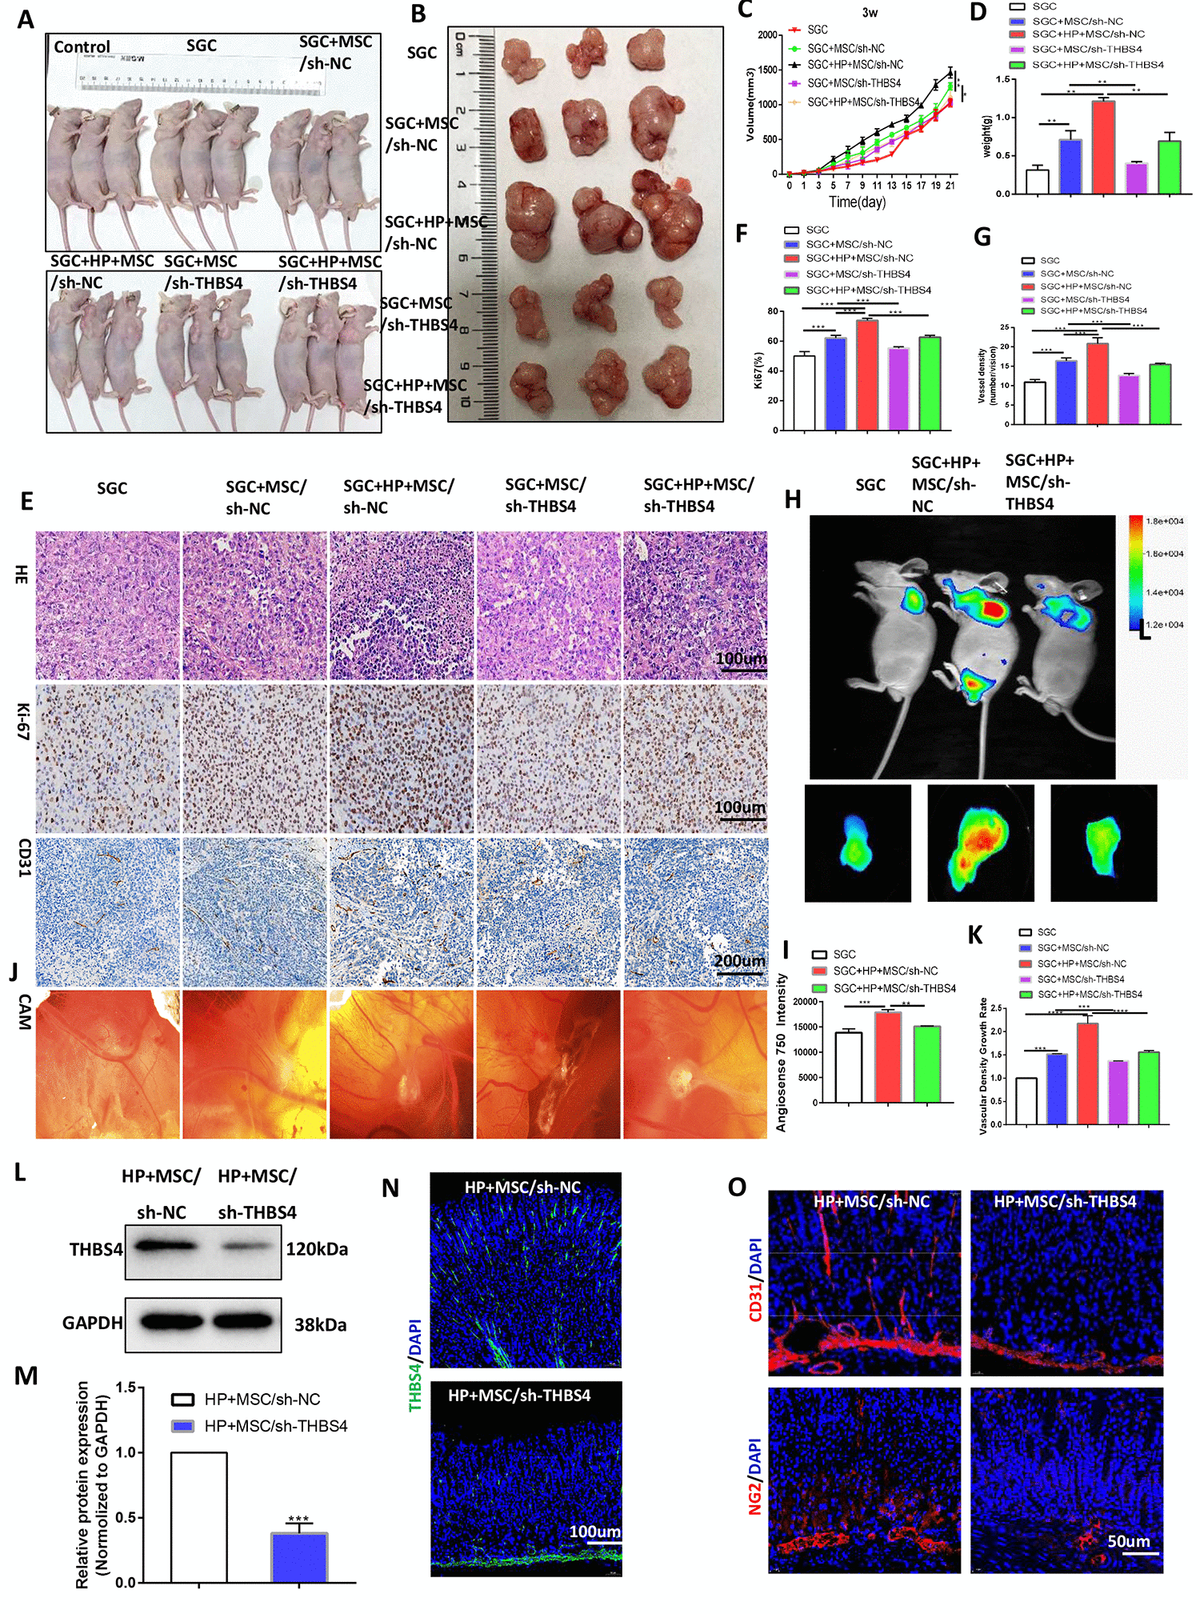 THBS4 mediates BM-MSC-induced promotion of GC angiogenesis in vivo. (A, B) Four-week-old nude male mice were injected with either SGC cells only or SGC and BM-MSCs transfected with recombinant lentiviral vectors. Three weeks following injection, the mice were euthanized, and the tumors were analyzed. n= 3 mice in control group and 5 mice per group in other groups. (C) Growth curve of tumors described in A. (D) Tumor weight of injected tumors at end-point. (E) H&E staining and Ki-67 and CD31 immunostaining of tumors described in A. (F, G) Quantification of staining presented in E performed with Image Plus. (H, I) Following AngioSense 750EX injection, tumor vascular permeability fluorescence imaging in vivo was performed to detect the neovascularization density of tumors in A. (J, K) Representative images and quantification of the CAM assay. n= 5 eggs in each group. (L, M) Western blot analysis of THBS4 in gastric tissues after NC BM-MSC or THBS4-knockdown BM-MSC transplantation. n= 3 mice in each group. (N) IF of THBS4 in gastric tissues after NC BM-MSC or THBS4-knockdown BM-MSC transplantation. (O) IF of CD31 and NG2 in gastric tissues in NC BM-MSC-transplanted mice and THBS4-knockdown BM-MSC-transplanted mice. n= 10 mice in each group.